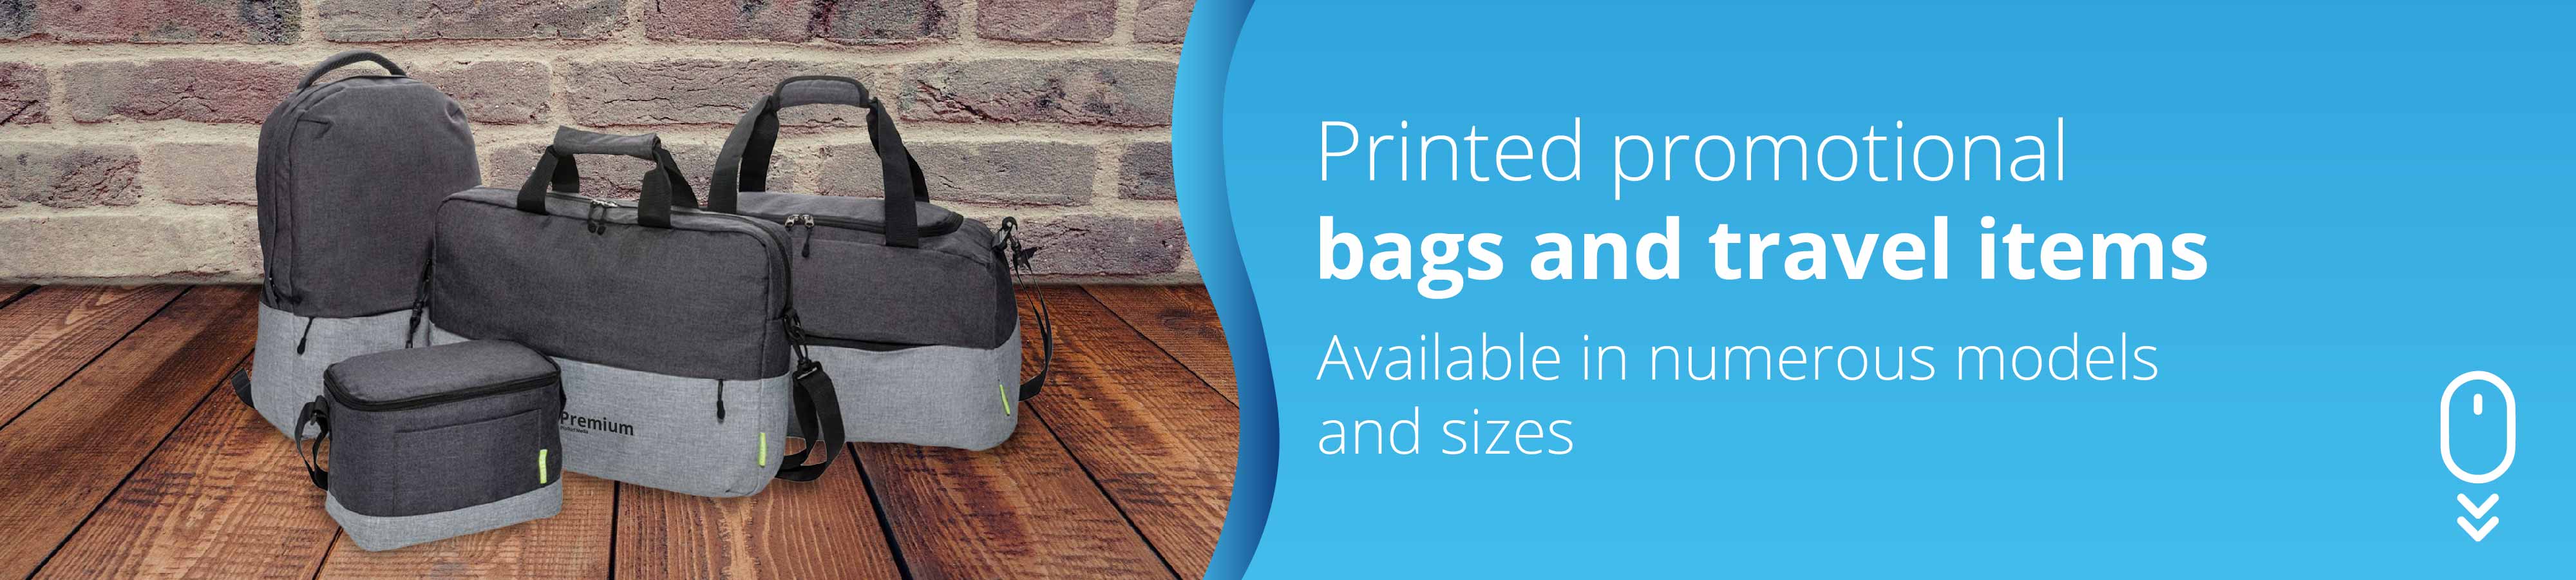 printed-promotional-bags-and-travel-items